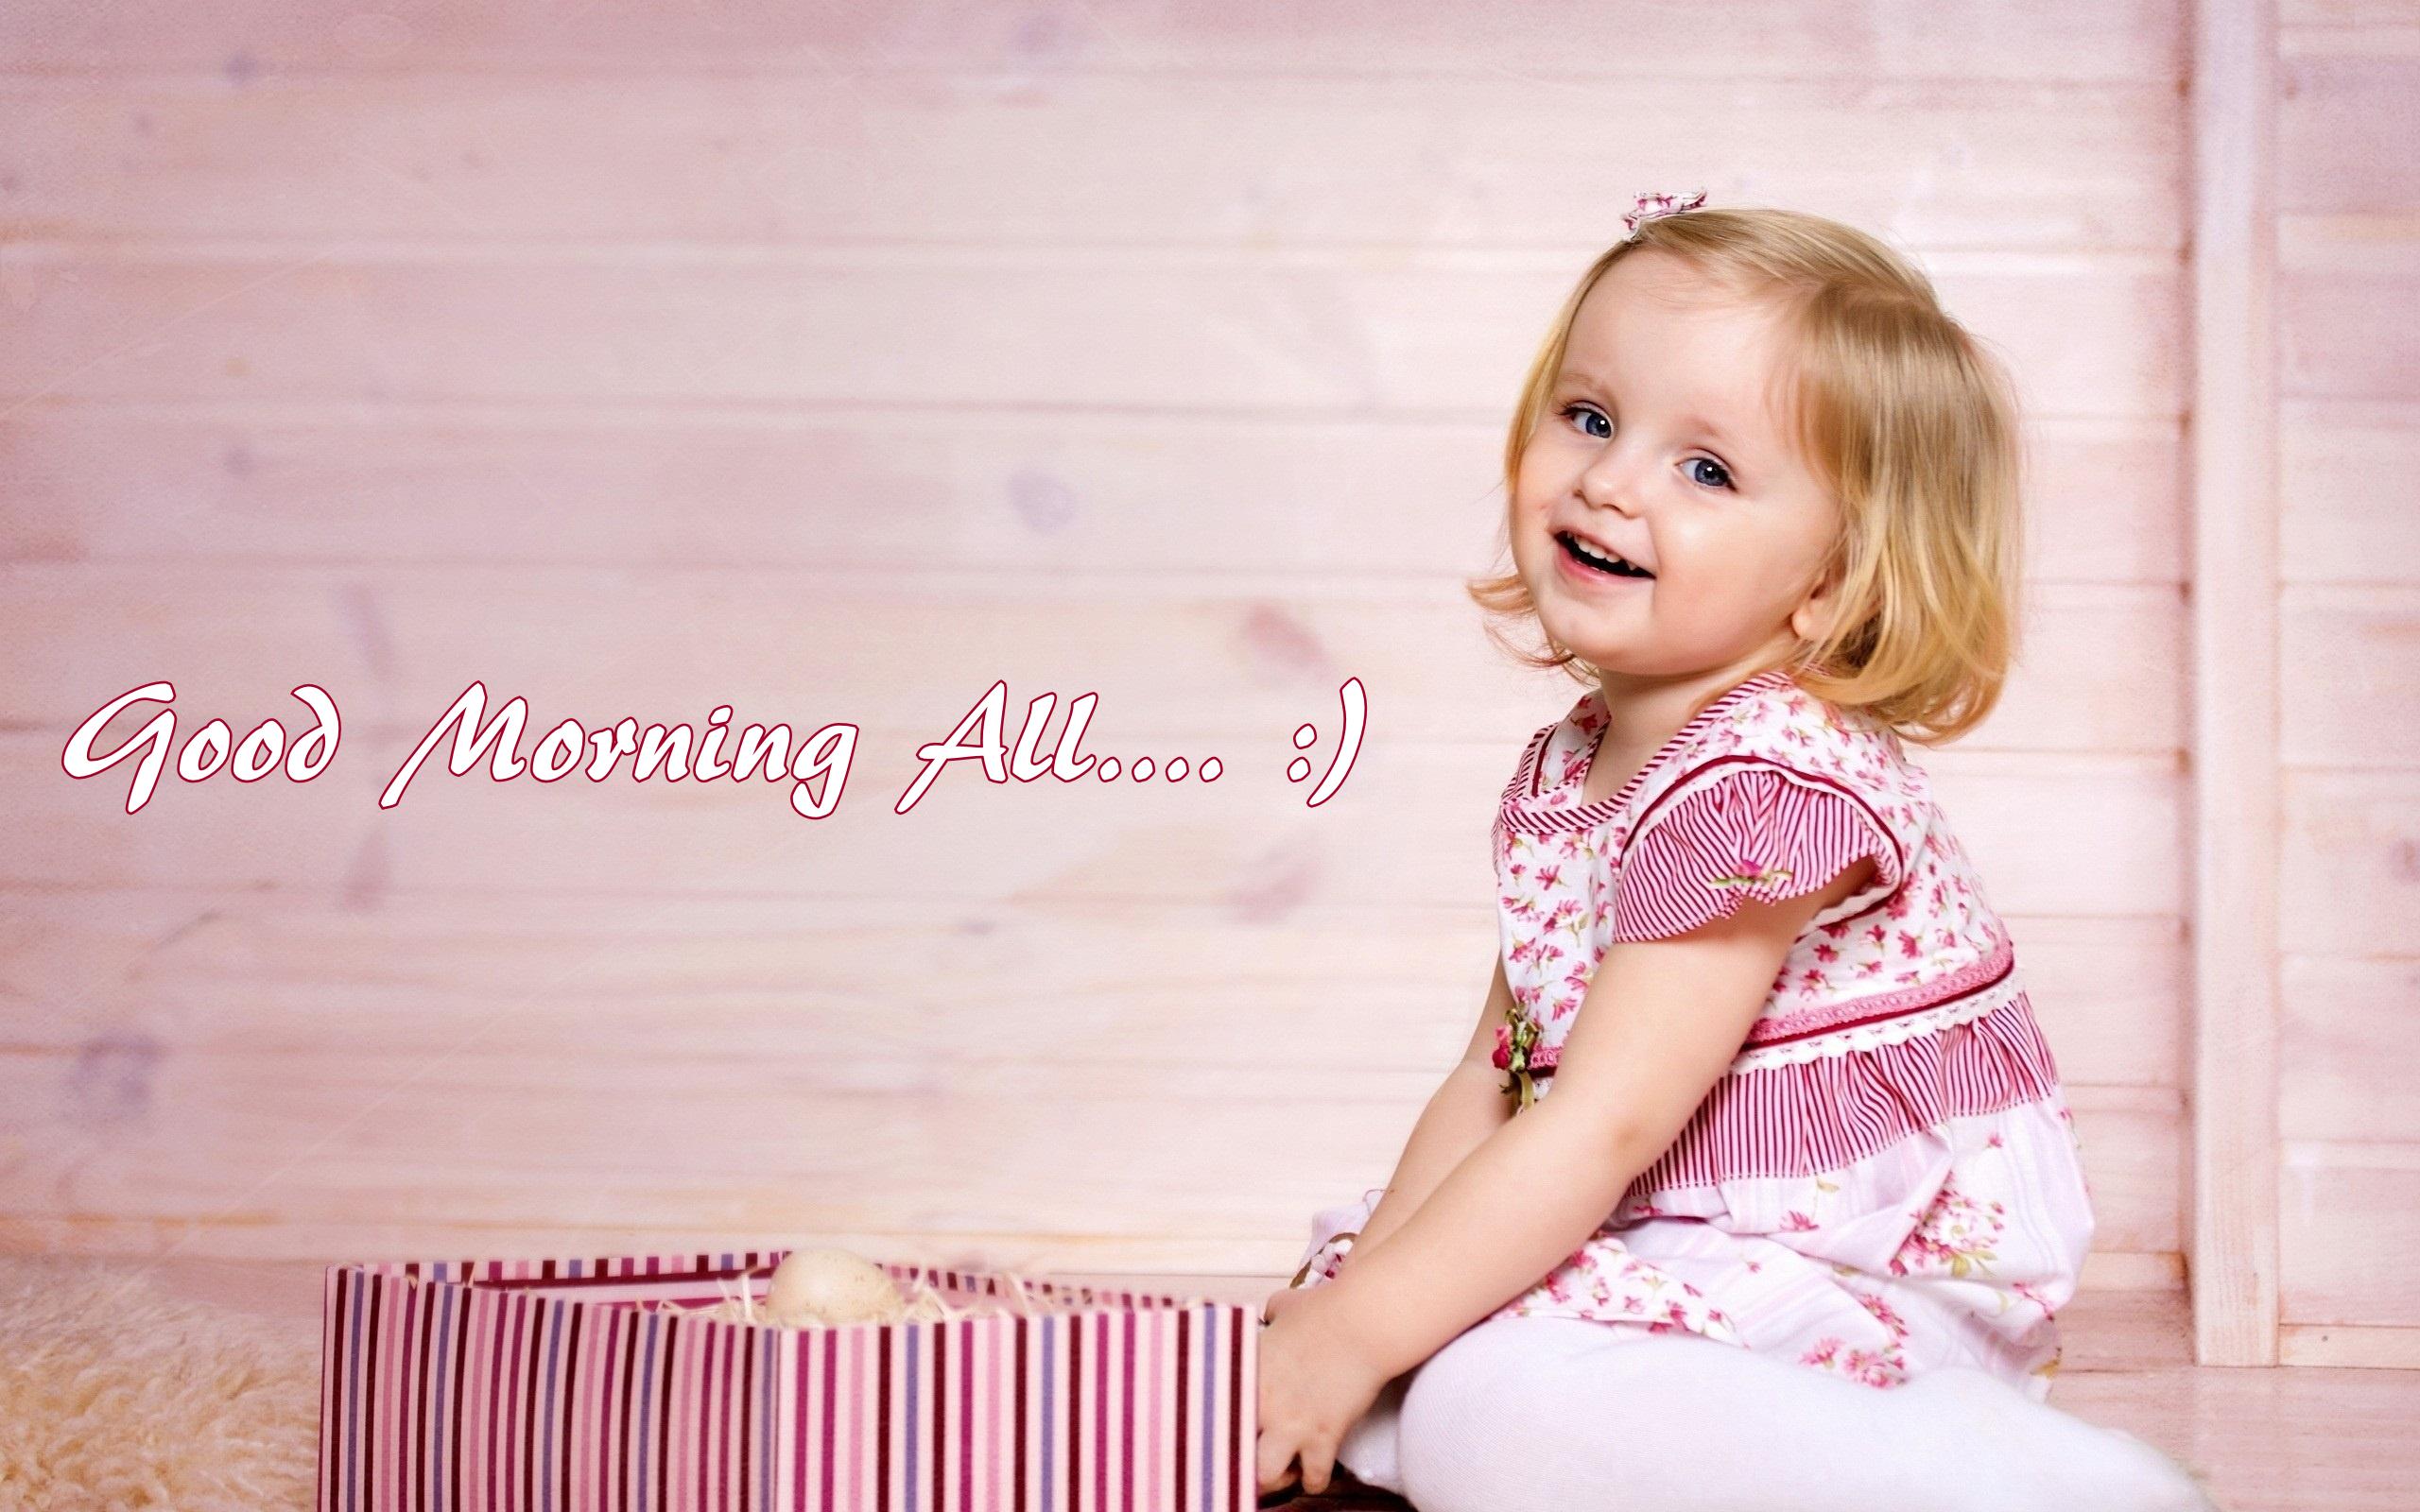 Good Morning Baby Wallpapers - Wallpaper Cave